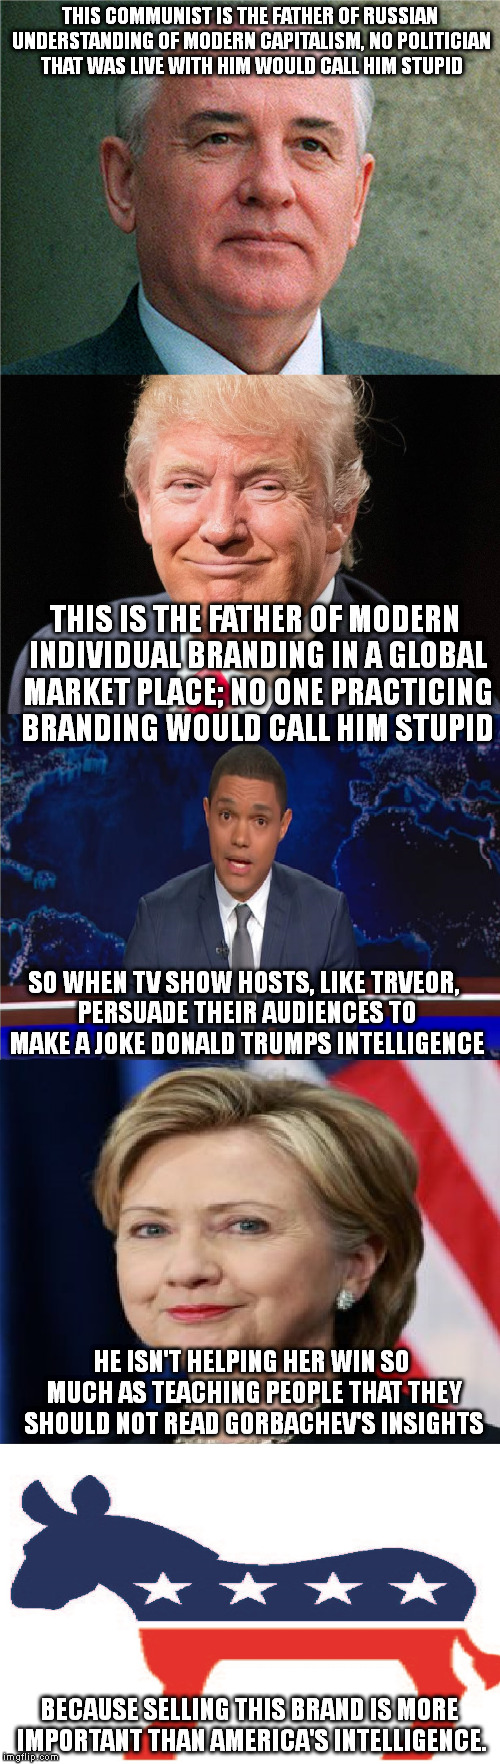 This is why I see the majority of opponents as infants. They grew up on things like the daily show for 'news'. | THIS COMMUNIST IS THE FATHER OF RUSSIAN UNDERSTANDING OF MODERN CAPITALISM, NO POLITICIAN THAT WAS LIVE WITH HIM WOULD CALL HIM STUPID; THIS IS THE FATHER OF MODERN INDIVIDUAL BRANDING IN A GLOBAL MARKET PLACE; NO ONE PRACTICING BRANDING WOULD CALL HIM STUPID; SO WHEN TV SHOW HOSTS, LIKE TRVEOR, PERSUADE THEIR AUDIENCES TO MAKE A JOKE DONALD TRUMPS INTELLIGENCE; HE ISN'T HELPING HER WIN SO MUCH AS TEACHING PEOPLE THAT THEY SHOULD NOT READ GORBACHEV'S INSIGHTS; BECAUSE SELLING THIS BRAND IS MORE IMPORTANT THAN AMERICA'S INTELLIGENCE. | image tagged in election 2016,trump 2016,hillary clinton 2016,memes,sad truth | made w/ Imgflip meme maker